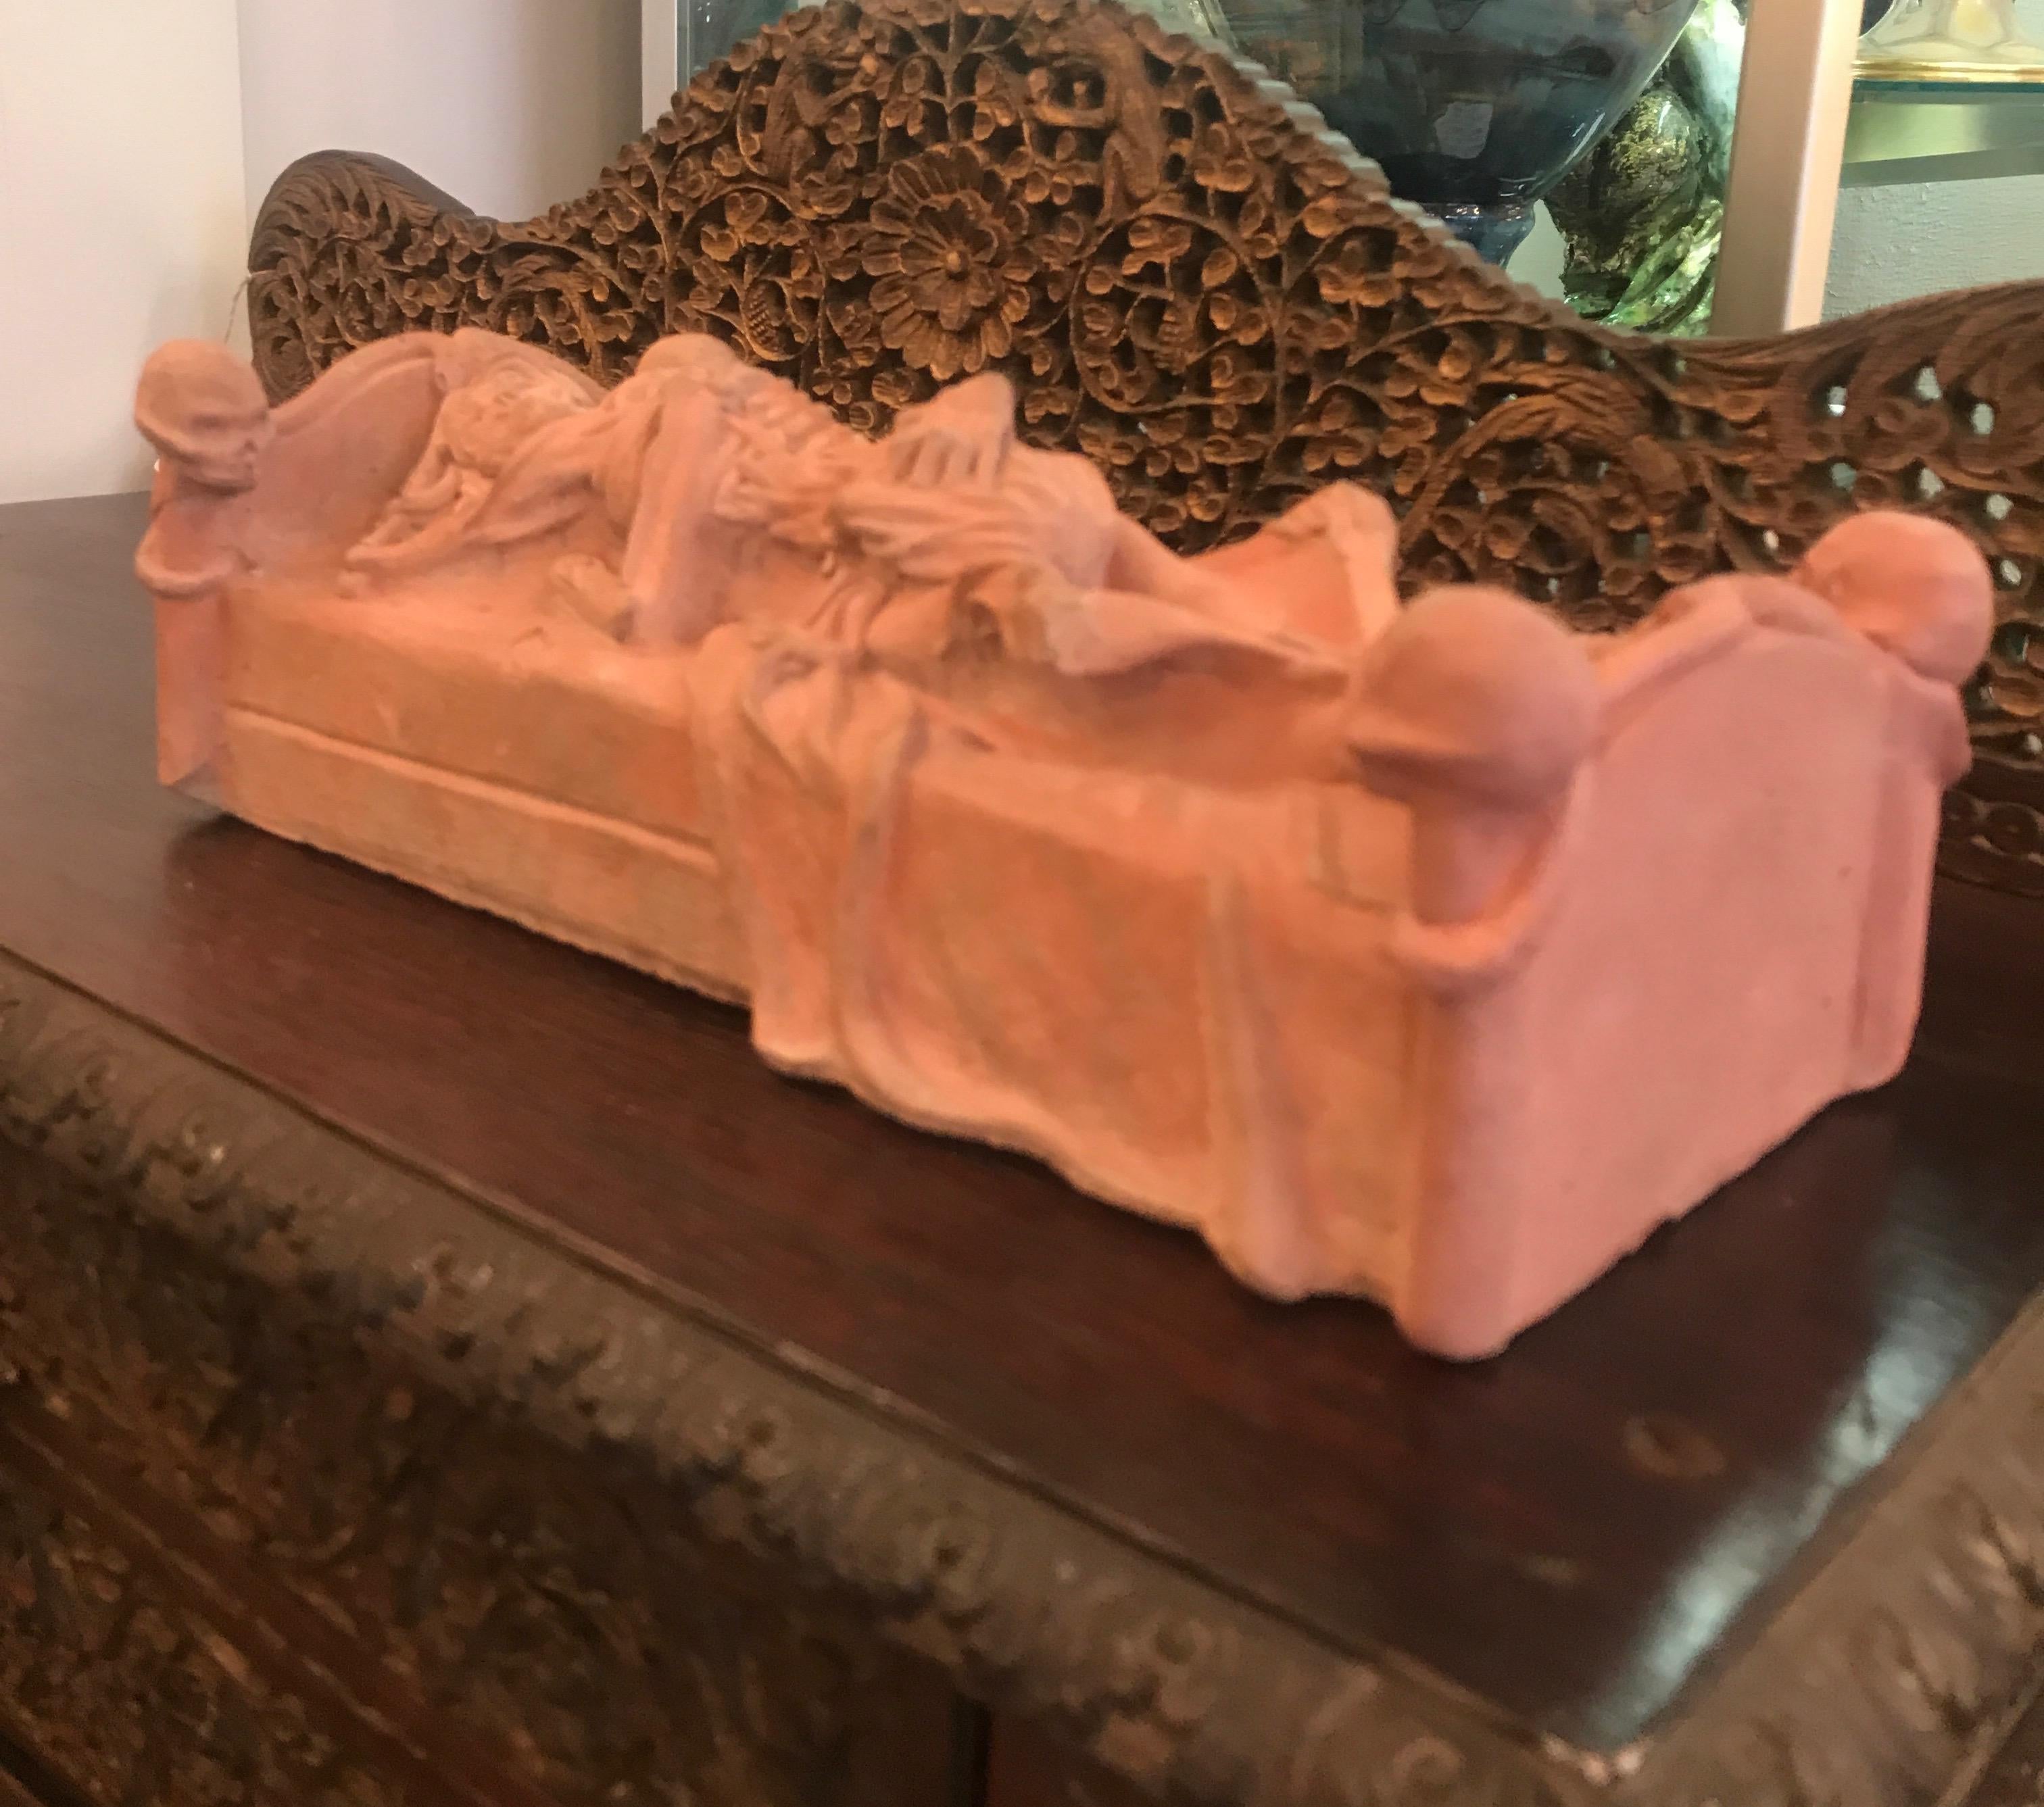 Tabletop sculpture from the 19th century in reddish clay cement of embracing skeletons on a bed with skull bedposts. 11.5 inches long, highly detailed and unusual. The skulls on the top of the bed have broken off and reattached decades ago. .